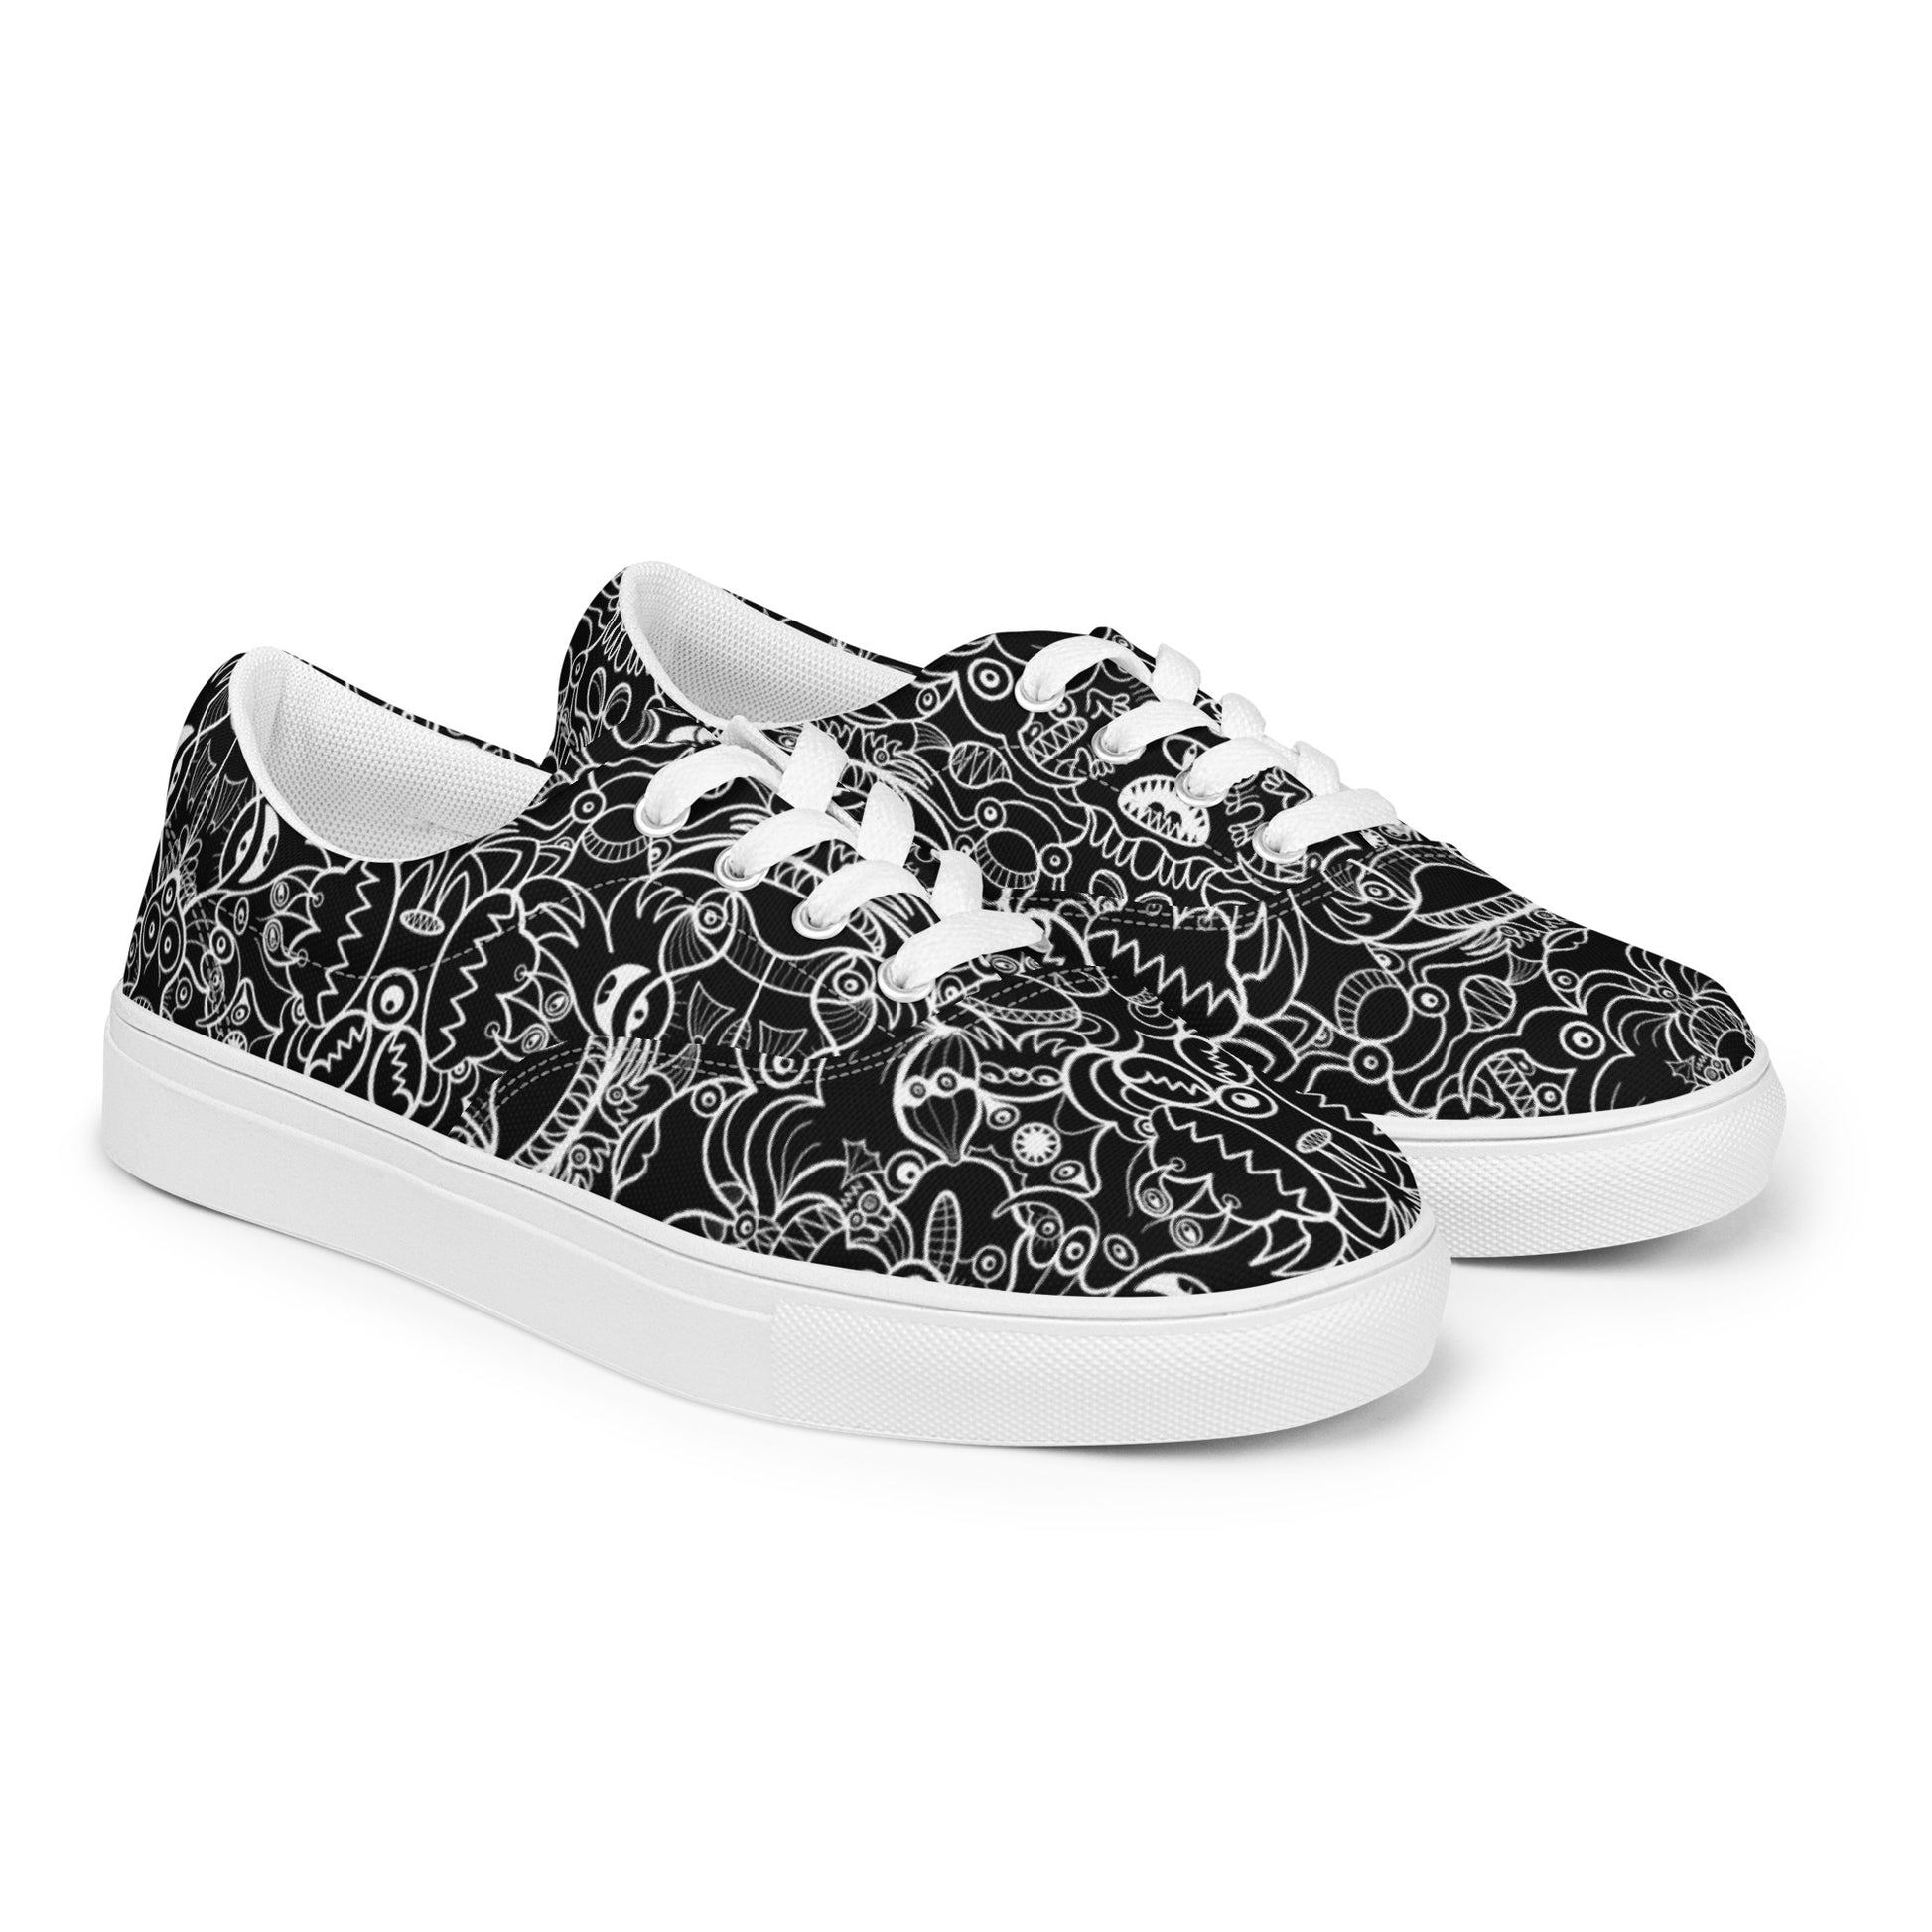 The powerful dark side of the Doodle world Women’s lace-up canvas shoes. Overview